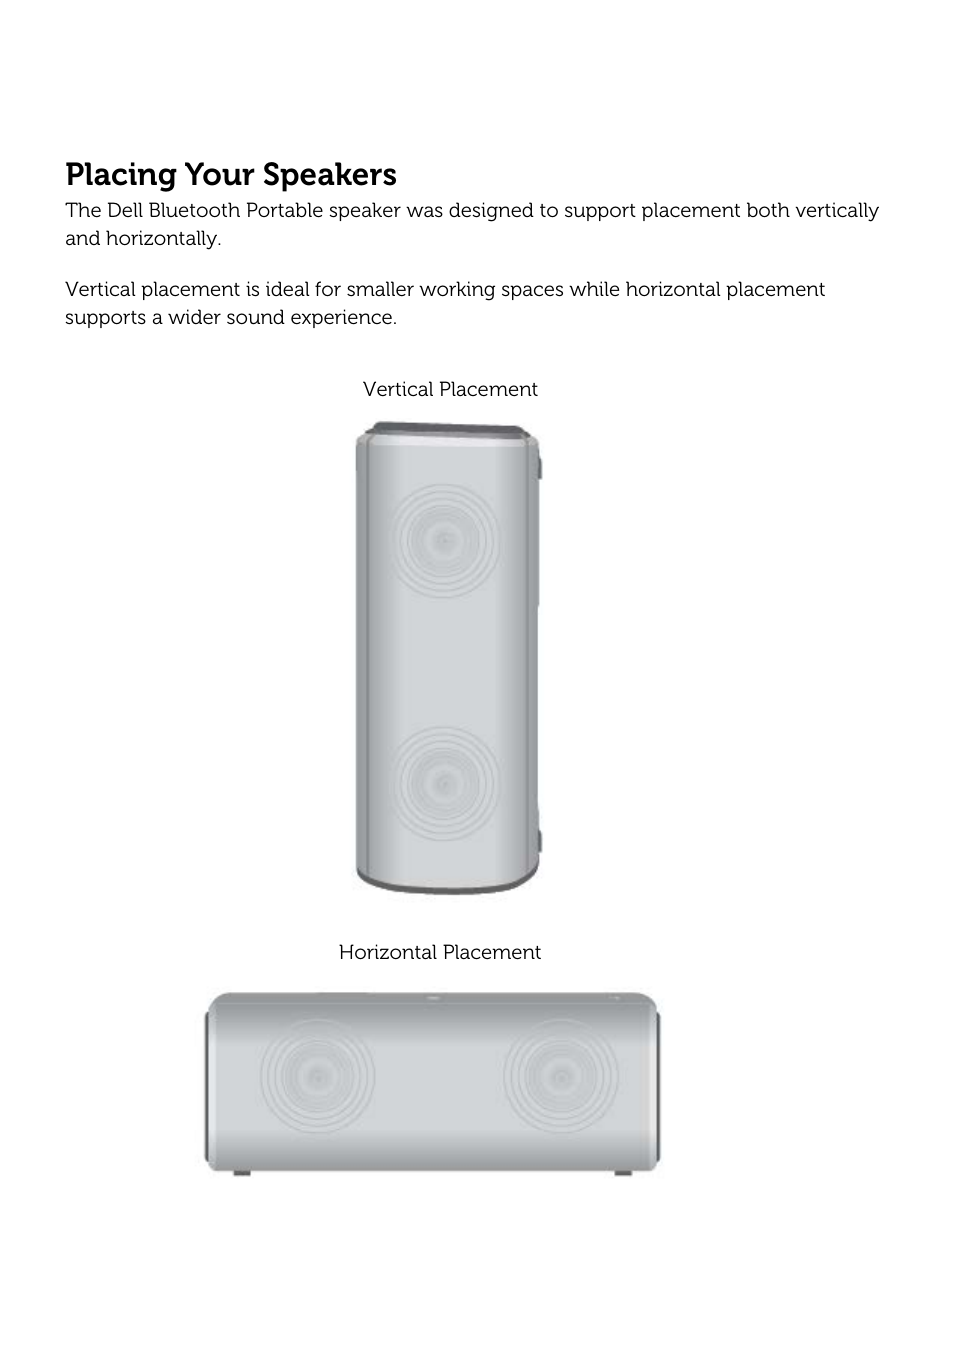 Placing your speakers | Dell AD211 Bluetooth Portable Speaker User Manual |  Page 22 / 32